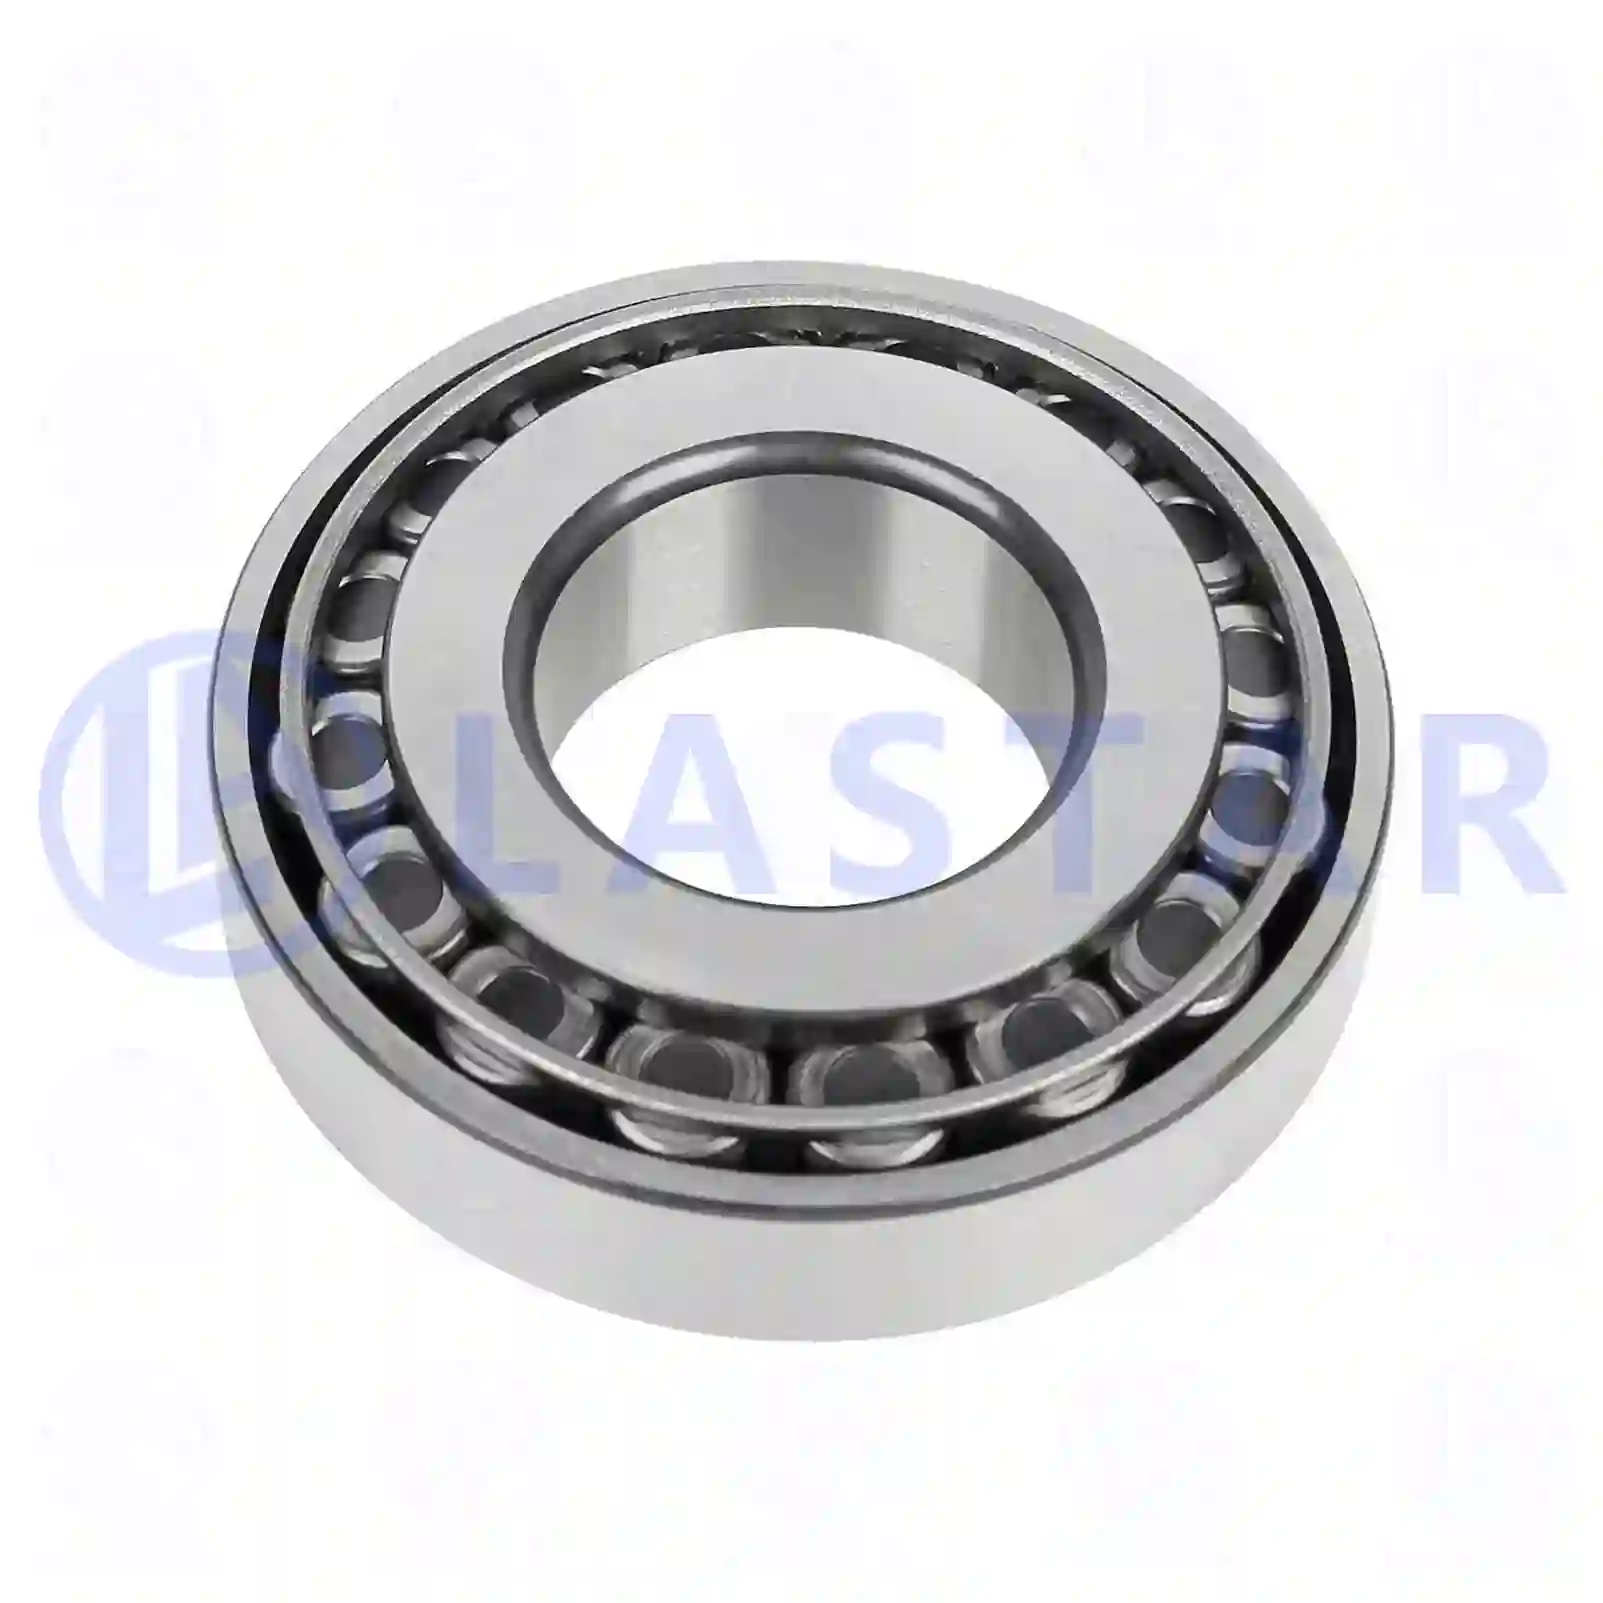 Bearings Tapered roller bearing, la no: 77724881 ,  oem no:01109981, 26800370, 94032605, 94034275, 94034276, 988445106, 988445106A, 1-09812026-0, 1-09812027-0, 5-09812063-0, 00819014, 01109981, 01109982, 26800370, 000720030309, 0019813705, 0019814605, 0019815105, 0069814205, 0099810305, 0109815905, 0109816305, 38140-86160, 38324-Z5000, 0773030900, 4200001200, 177802, 26800370 Lastar Spare Part | Truck Spare Parts, Auotomotive Spare Parts